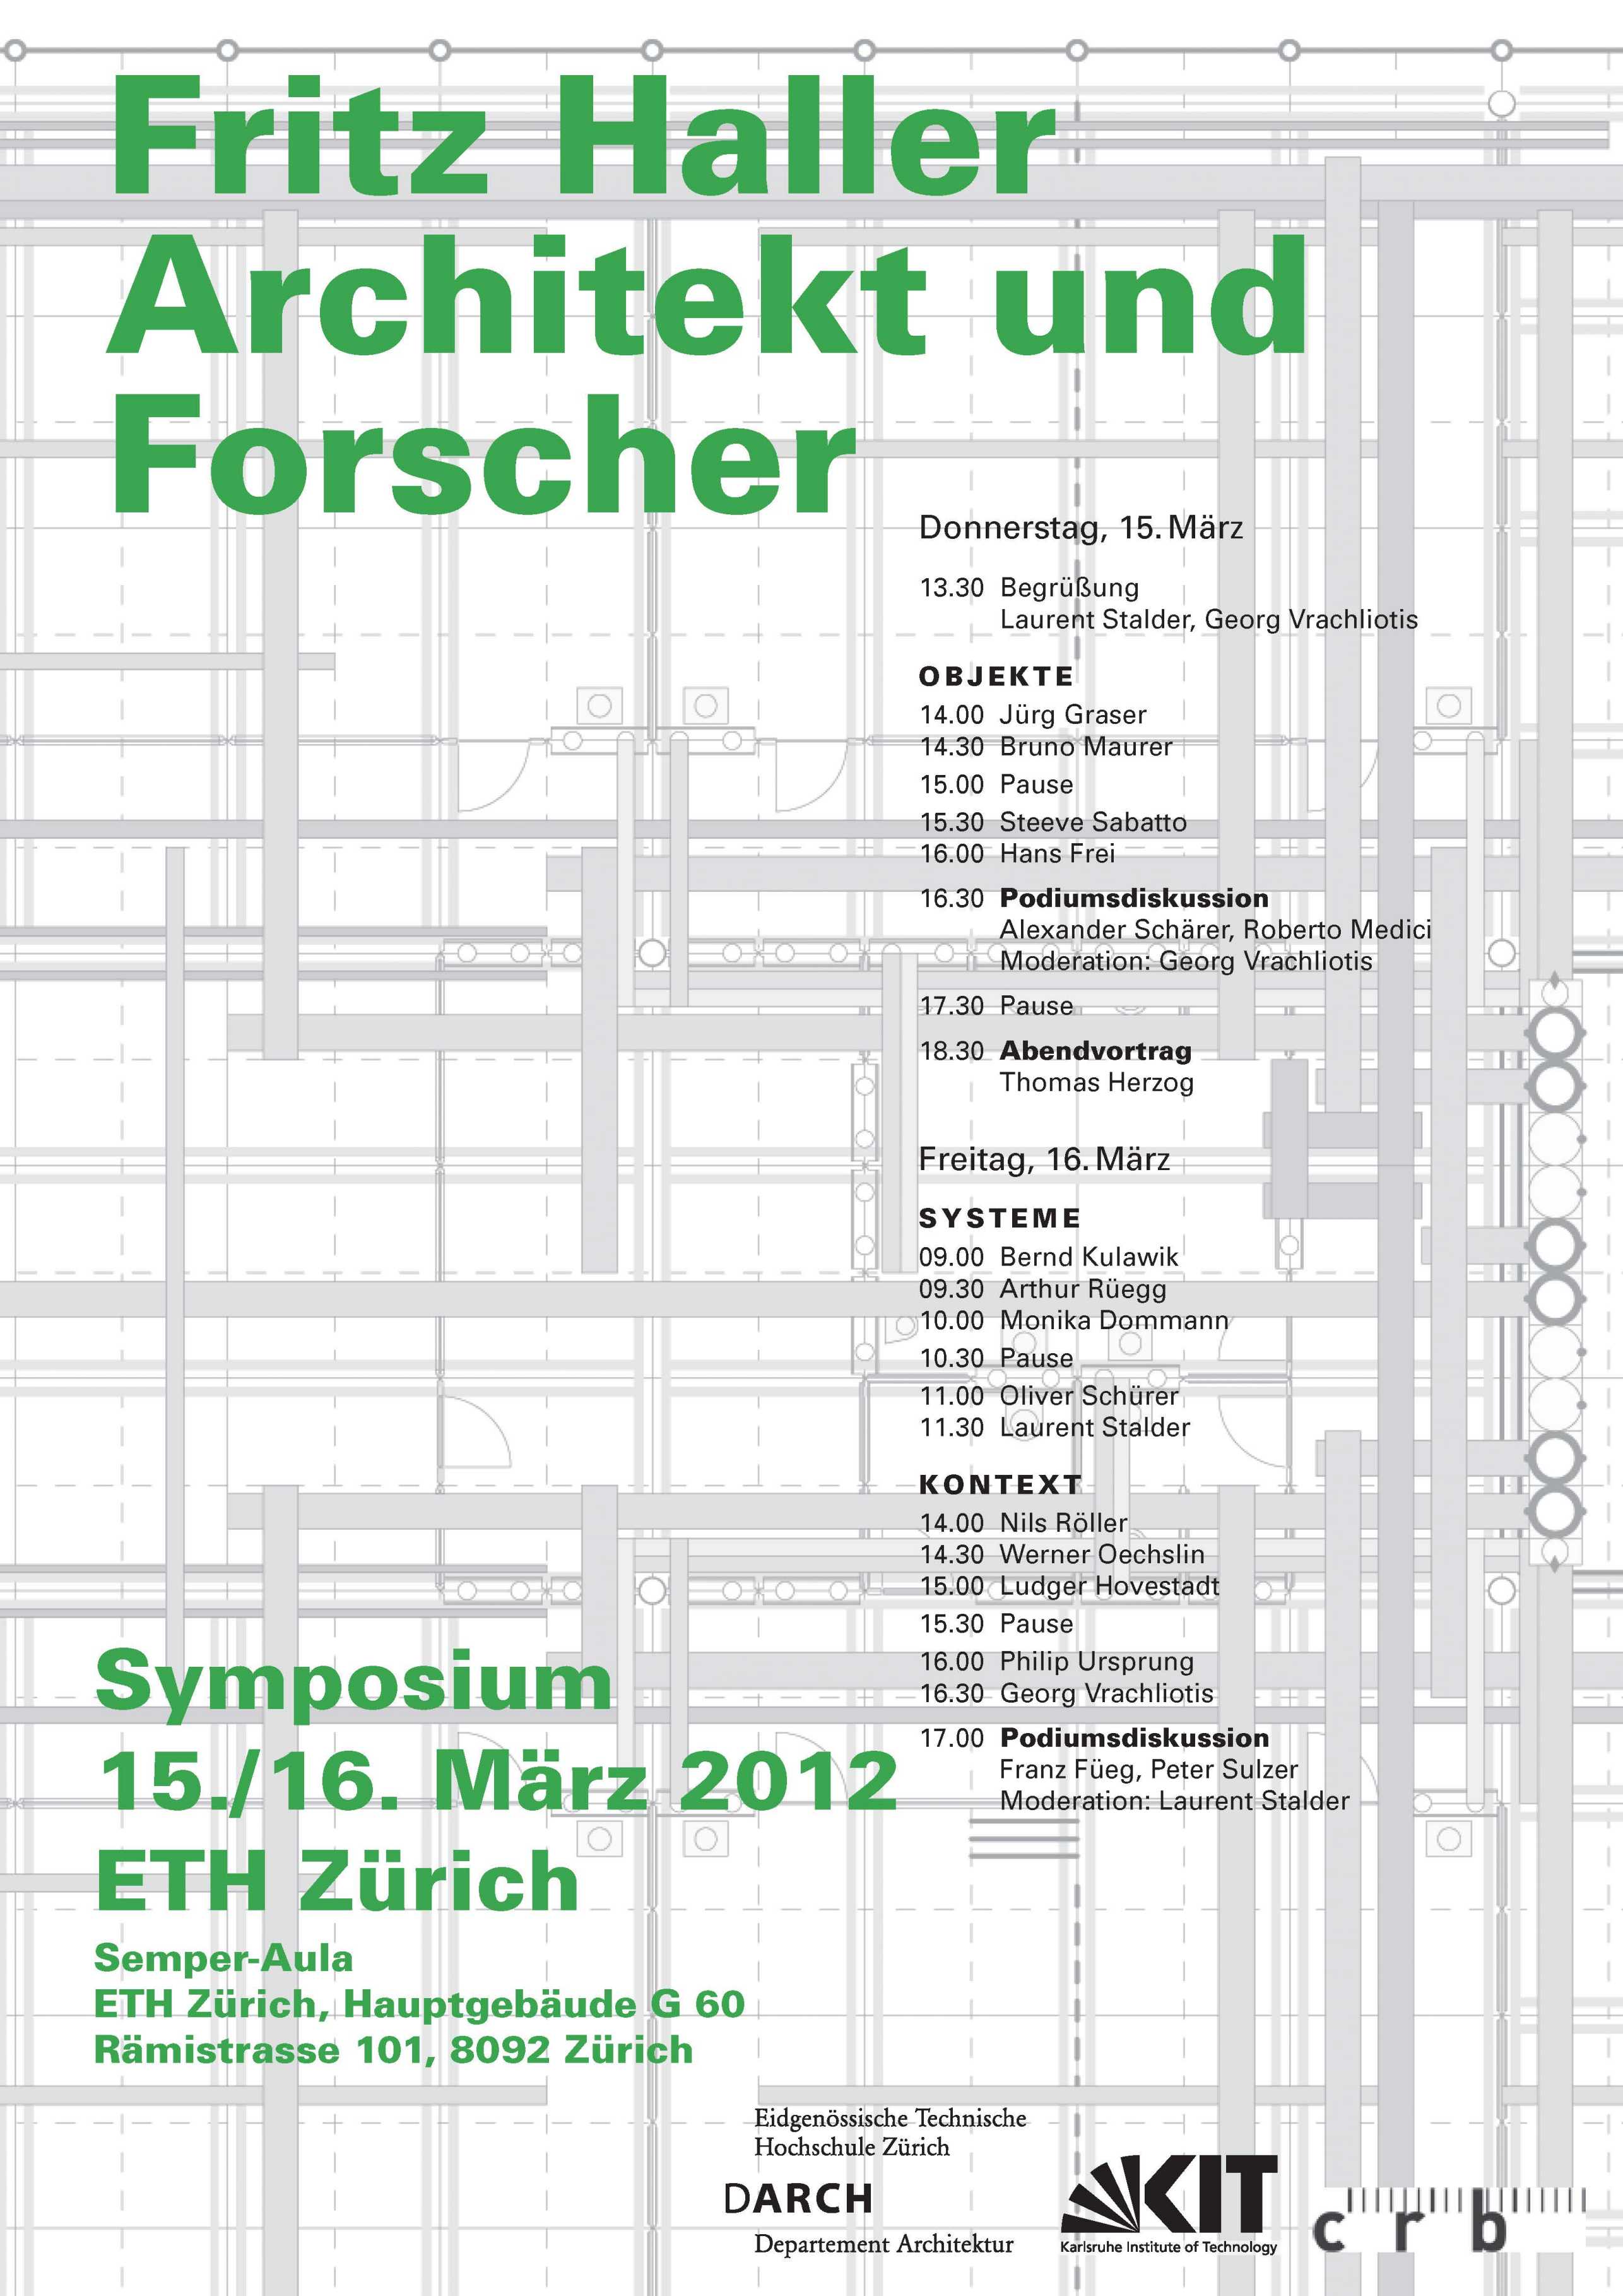 Poster, 2012